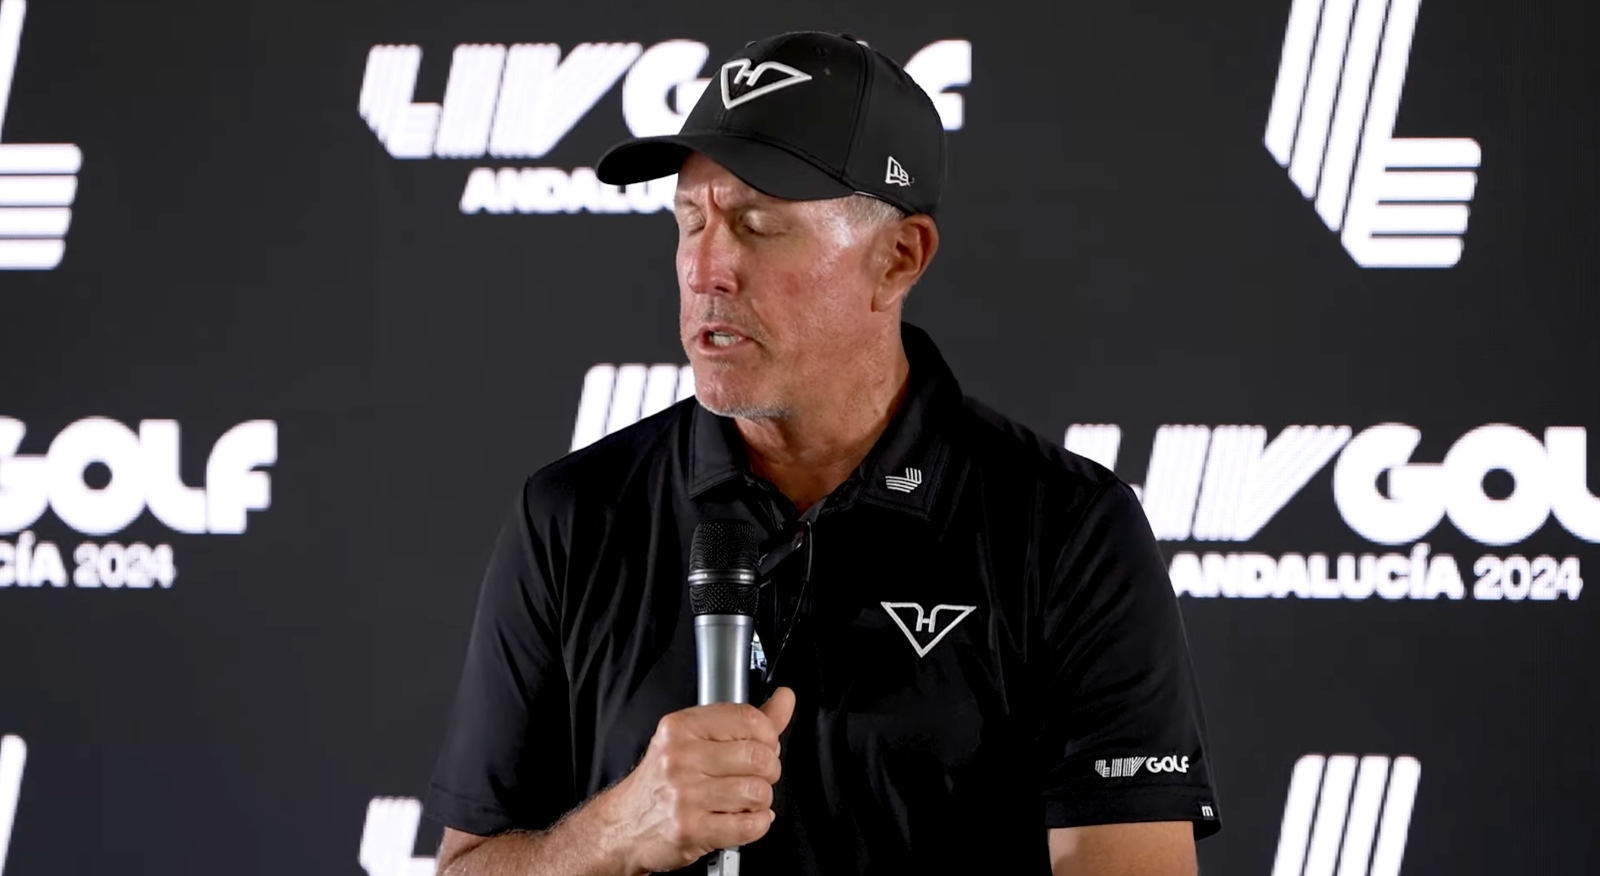 Phil Mickelson LIV Golf press conference